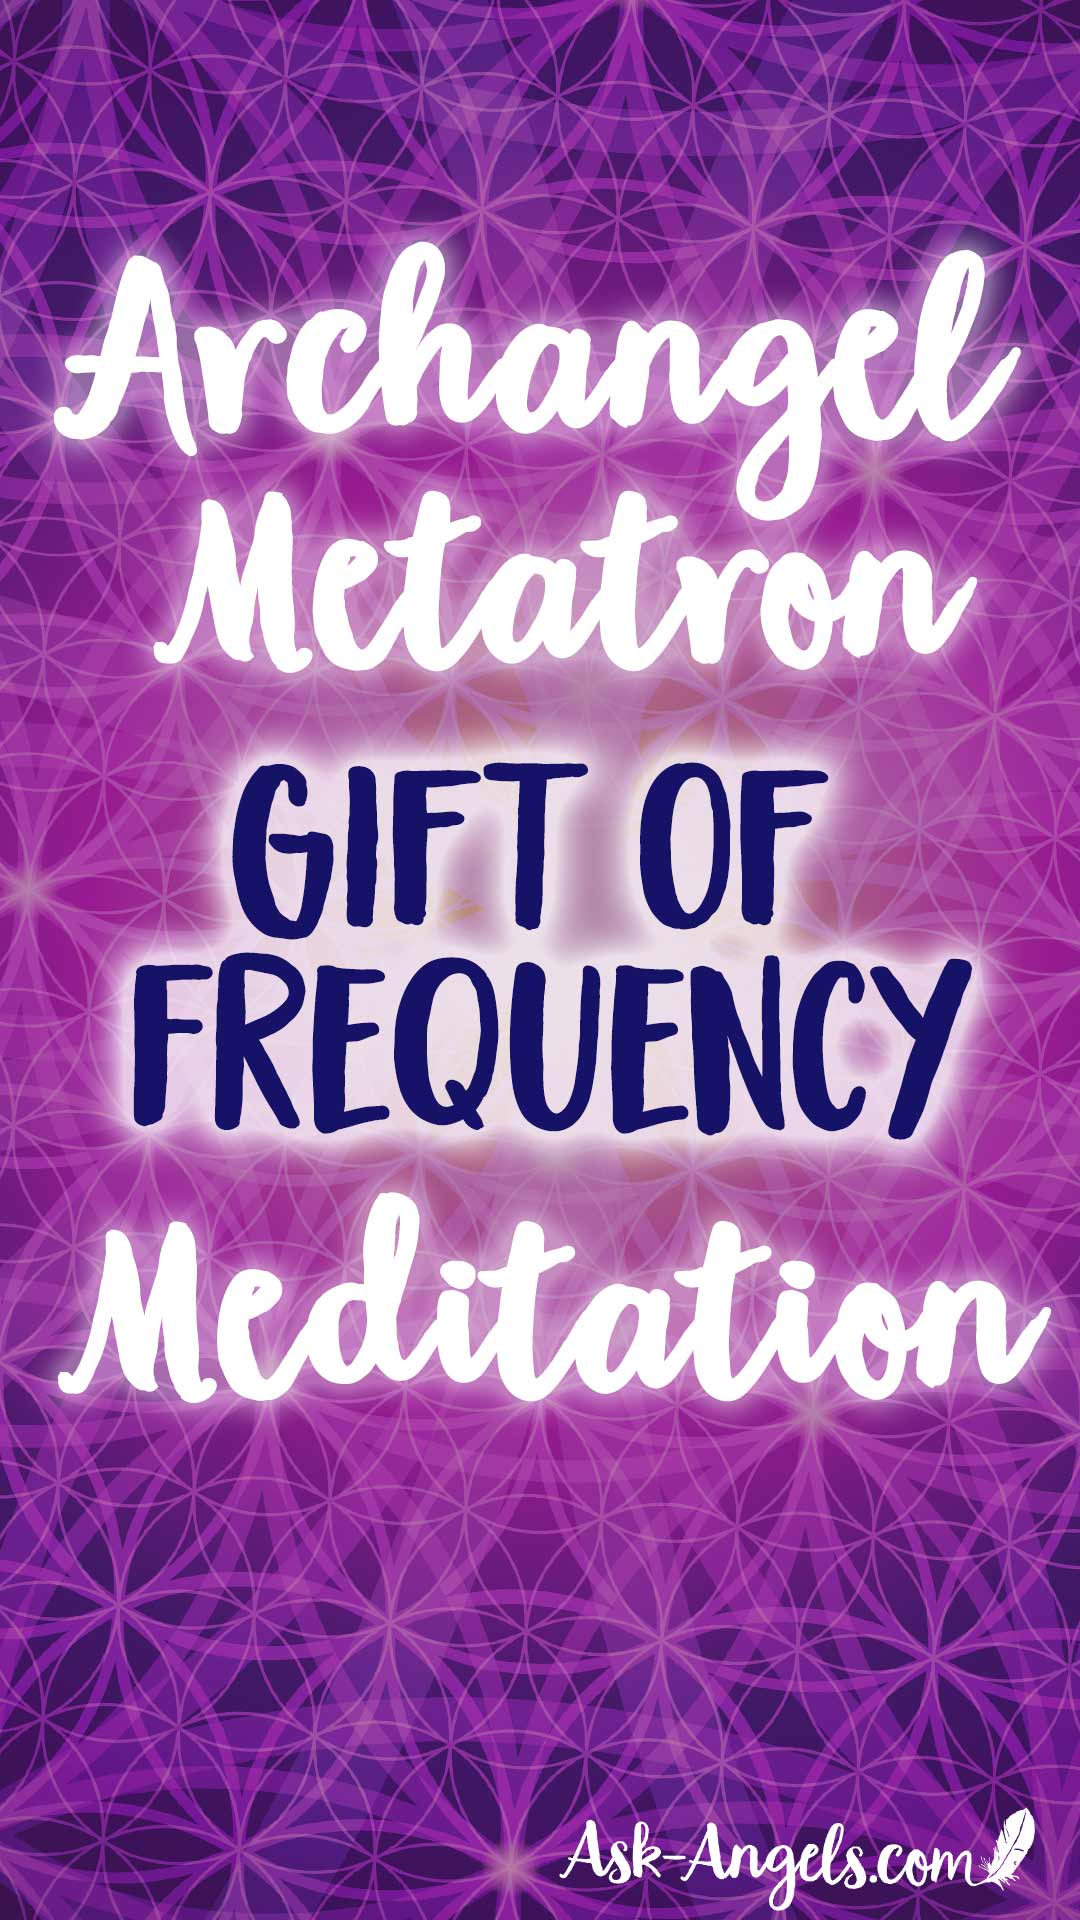 Get a Free "Gift of Frequency" Angel Meditation with Archangel Metatron here! Clear limiting beliefs and raise your vibration to deeply attune to love now.